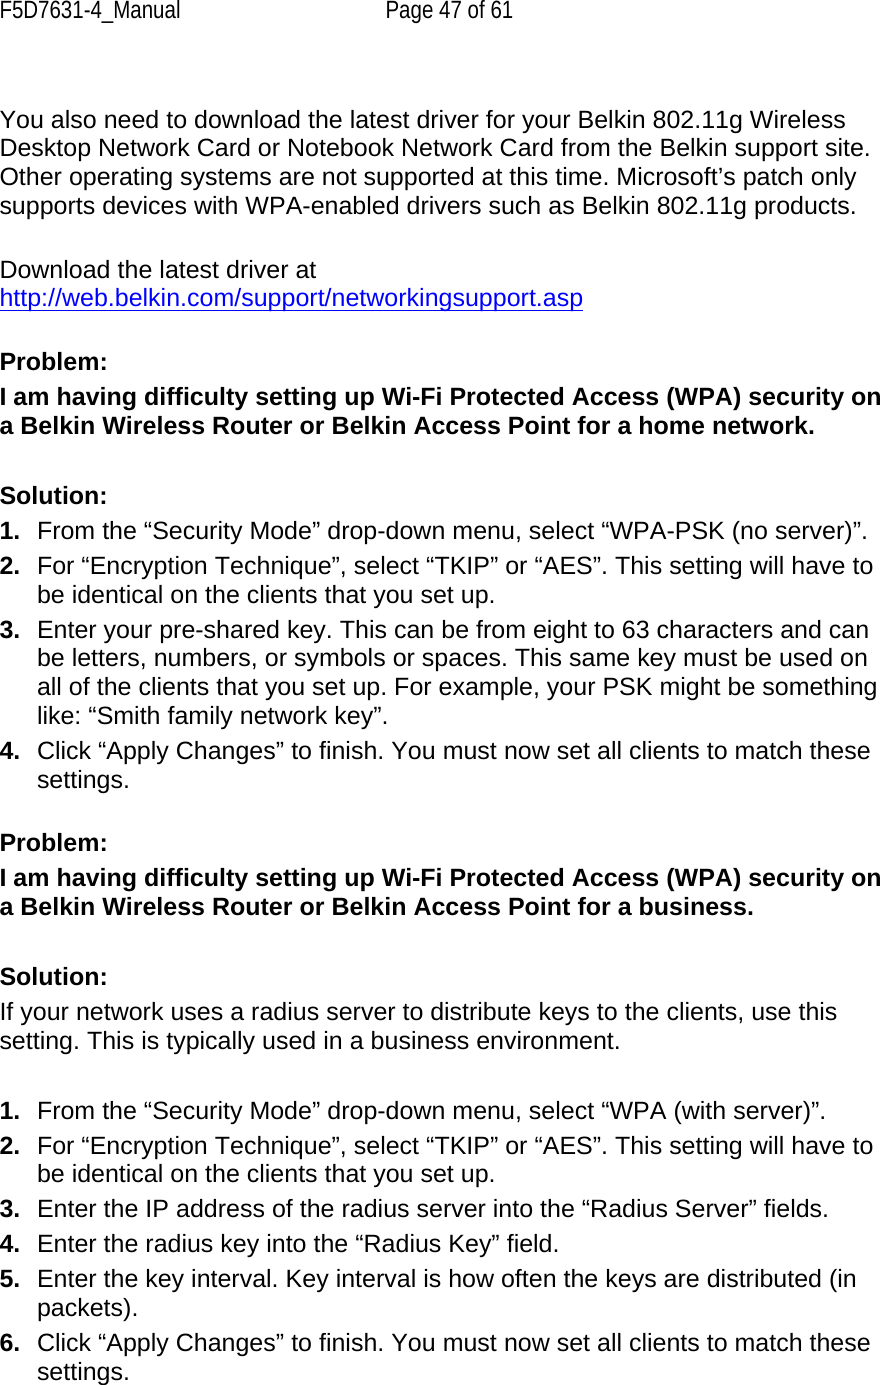 F5D7631-4_Manual  Page 47 of 61  You also need to download the latest driver for your Belkin 802.11g Wireless Desktop Network Card or Notebook Network Card from the Belkin support site. Other operating systems are not supported at this time. Microsoft’s patch only supports devices with WPA-enabled drivers such as Belkin 802.11g products.  Download the latest driver at http://web.belkin.com/support/networkingsupport.asp Problem: I am having difficulty setting up Wi-Fi Protected Access (WPA) security on a Belkin Wireless Router or Belkin Access Point for a home network.  Solution: 1.  From the “Security Mode” drop-down menu, select “WPA-PSK (no server)”. 2.  For “Encryption Technique”, select “TKIP” or “AES”. This setting will have to be identical on the clients that you set up. 3.  Enter your pre-shared key. This can be from eight to 63 characters and can be letters, numbers, or symbols or spaces. This same key must be used on all of the clients that you set up. For example, your PSK might be something like: “Smith family network key”. 4.  Click “Apply Changes” to finish. You must now set all clients to match these settings.  Problem: I am having difficulty setting up Wi-Fi Protected Access (WPA) security on a Belkin Wireless Router or Belkin Access Point for a business.  Solution: If your network uses a radius server to distribute keys to the clients, use this setting. This is typically used in a business environment.  1.  From the “Security Mode” drop-down menu, select “WPA (with server)”. 2.  For “Encryption Technique”, select “TKIP” or “AES”. This setting will have to be identical on the clients that you set up. 3.  Enter the IP address of the radius server into the “Radius Server” fields. 4.  Enter the radius key into the “Radius Key” field. 5.  Enter the key interval. Key interval is how often the keys are distributed (in packets). 6.  Click “Apply Changes” to finish. You must now set all clients to match these settings.